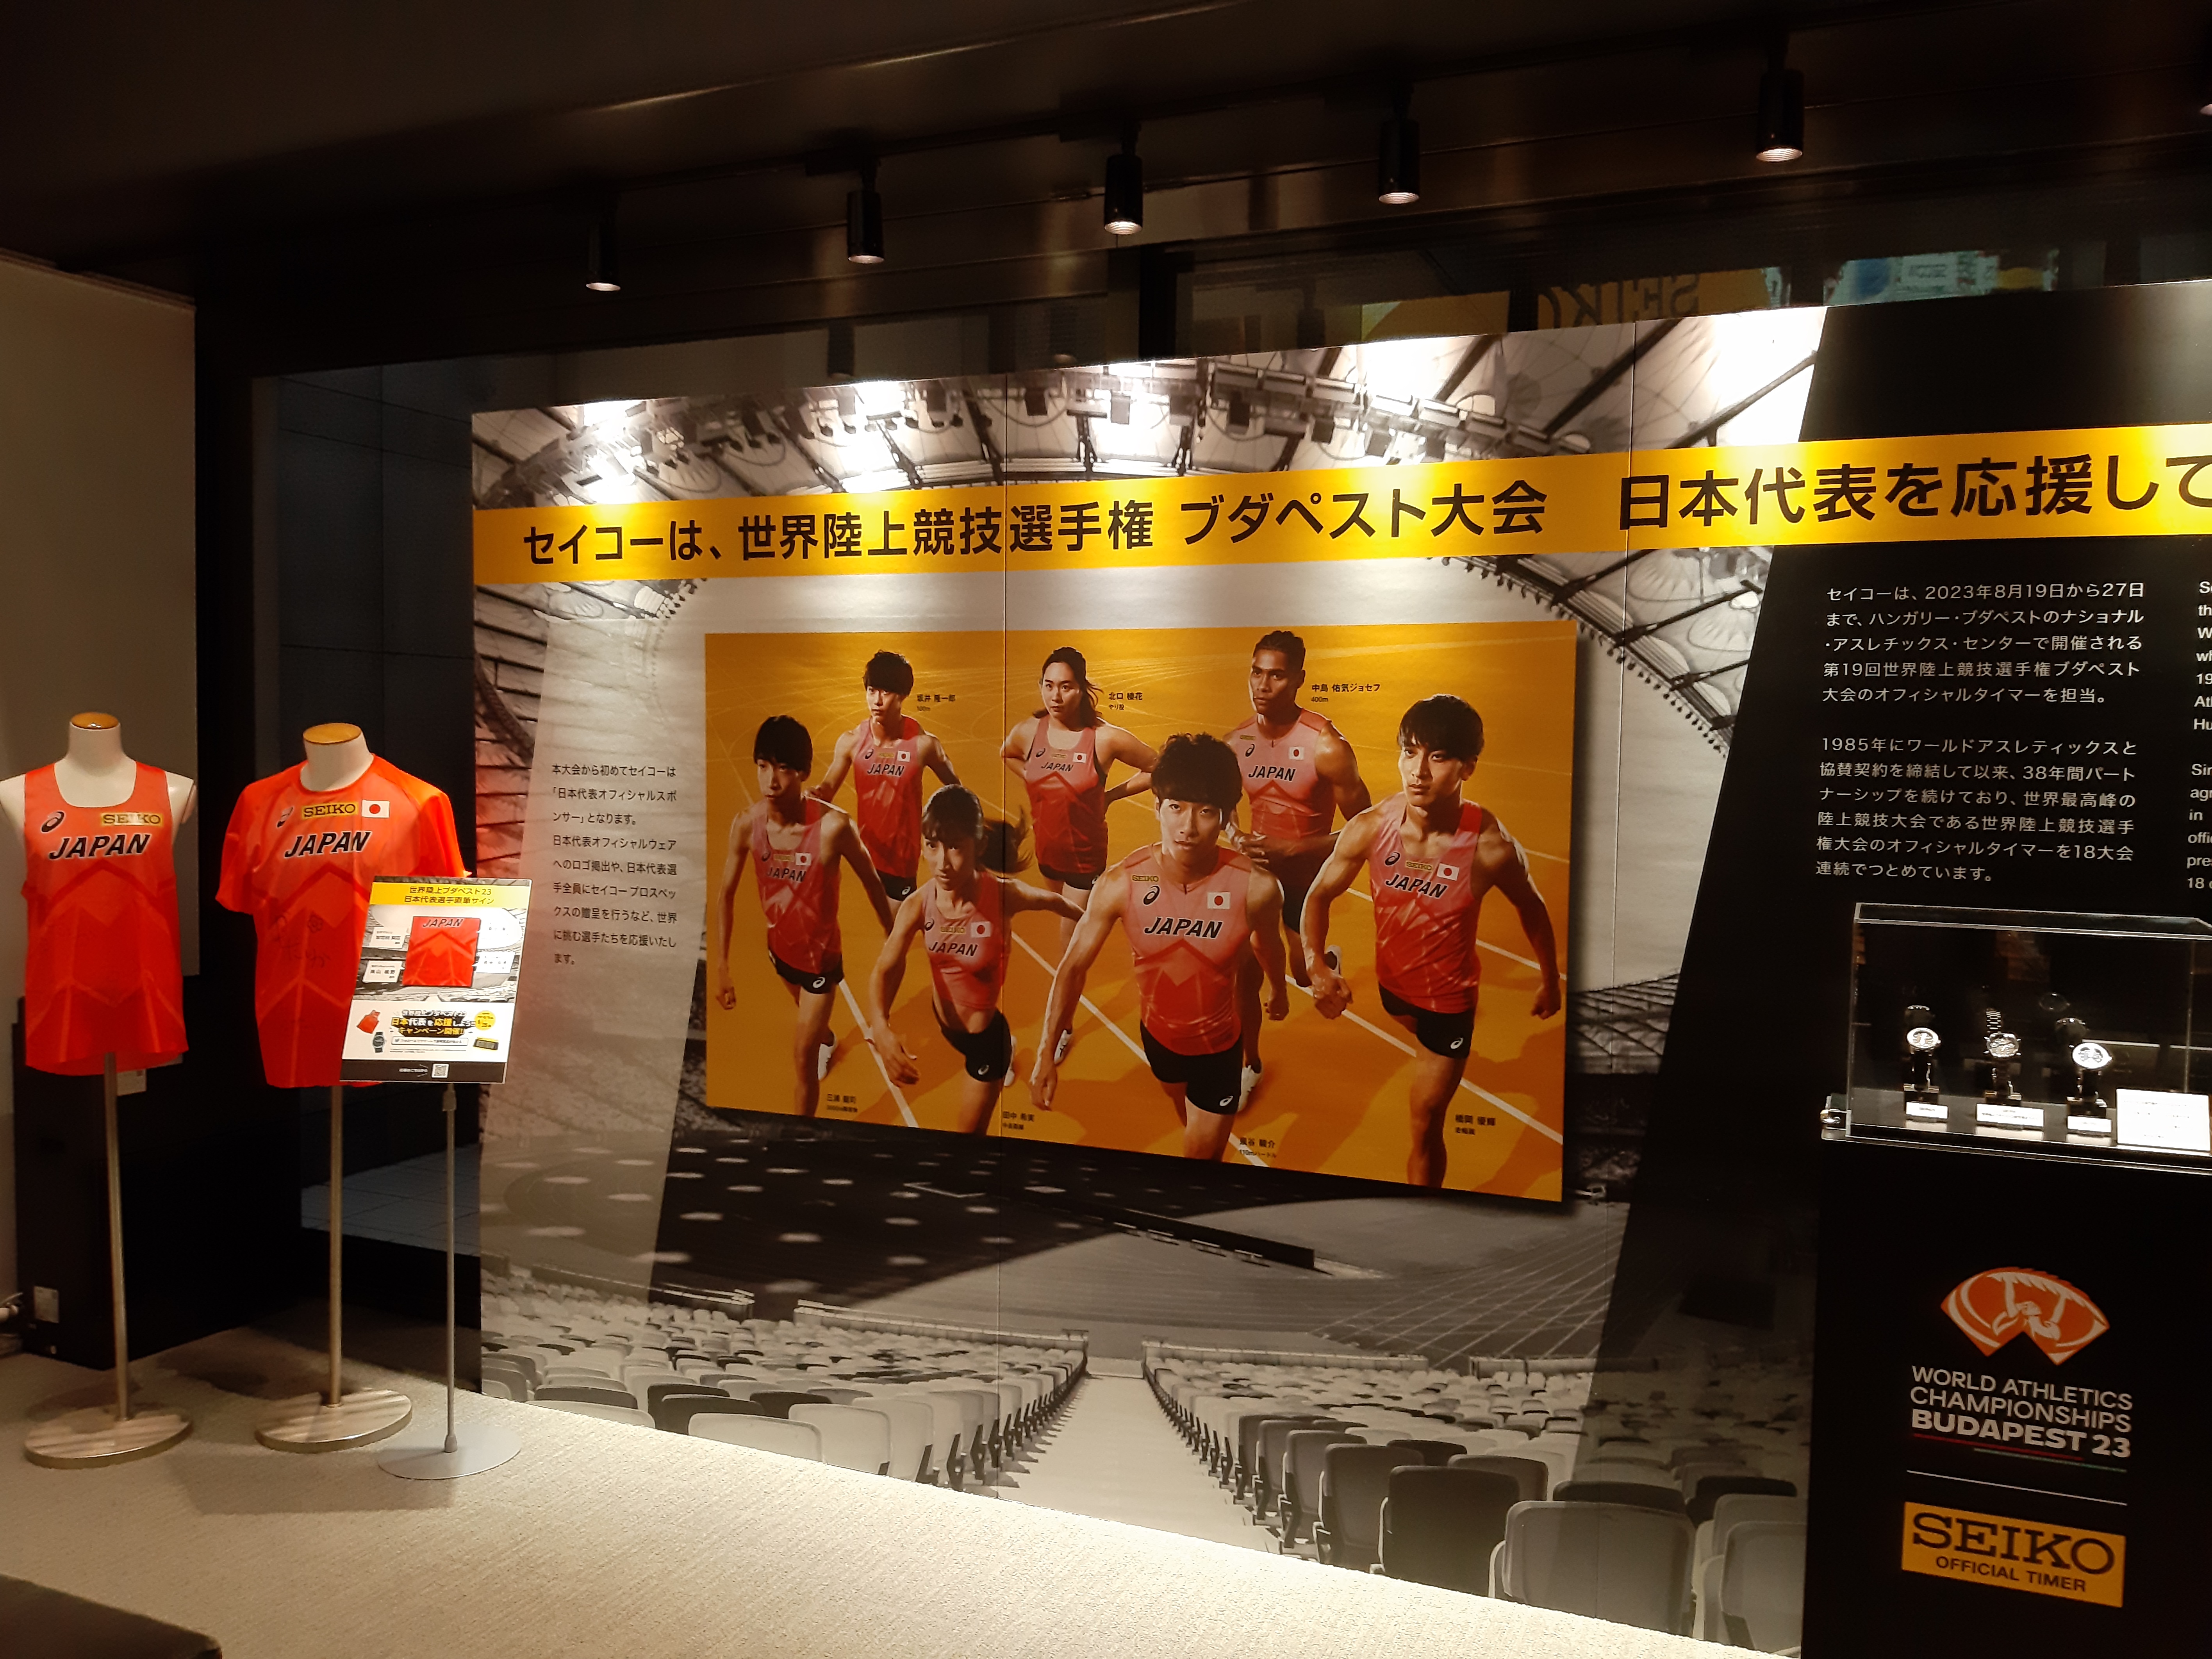 Special Exhibition of World Athletics Championships Budapest